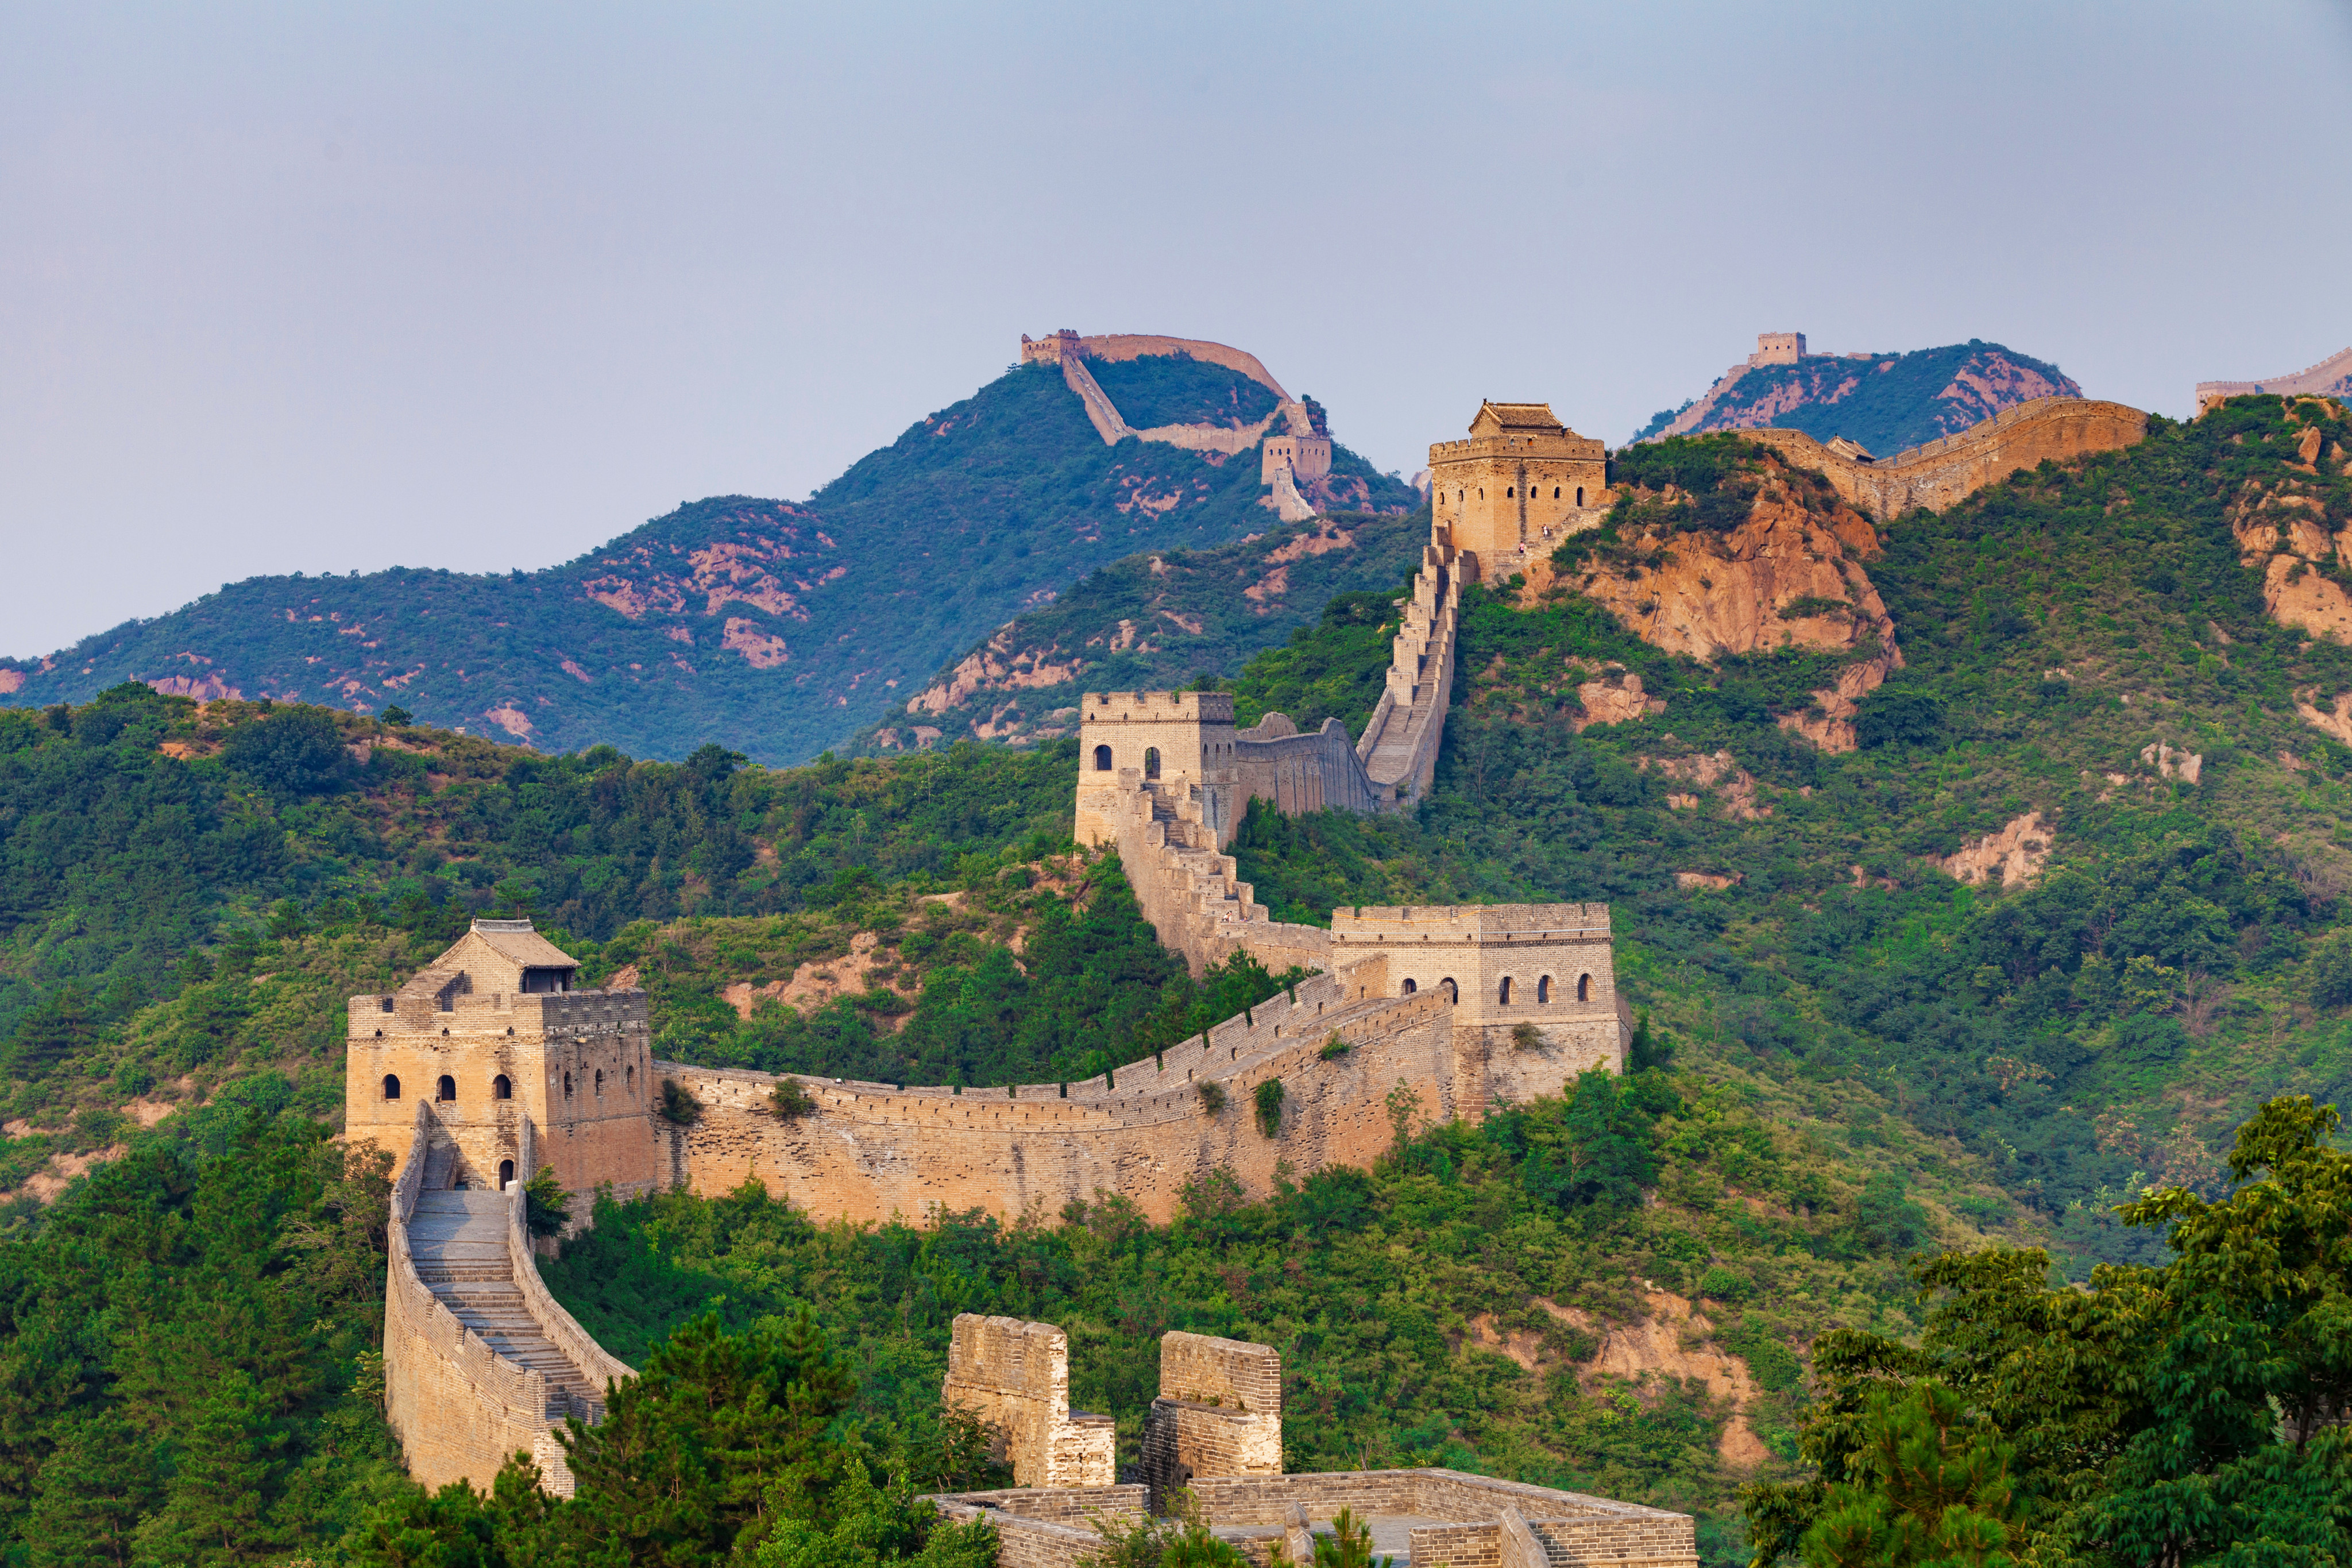 Scientists have found the Great Wall of China is actually being protected by thin layers of moss and lichen. Photo: Shutterstock.